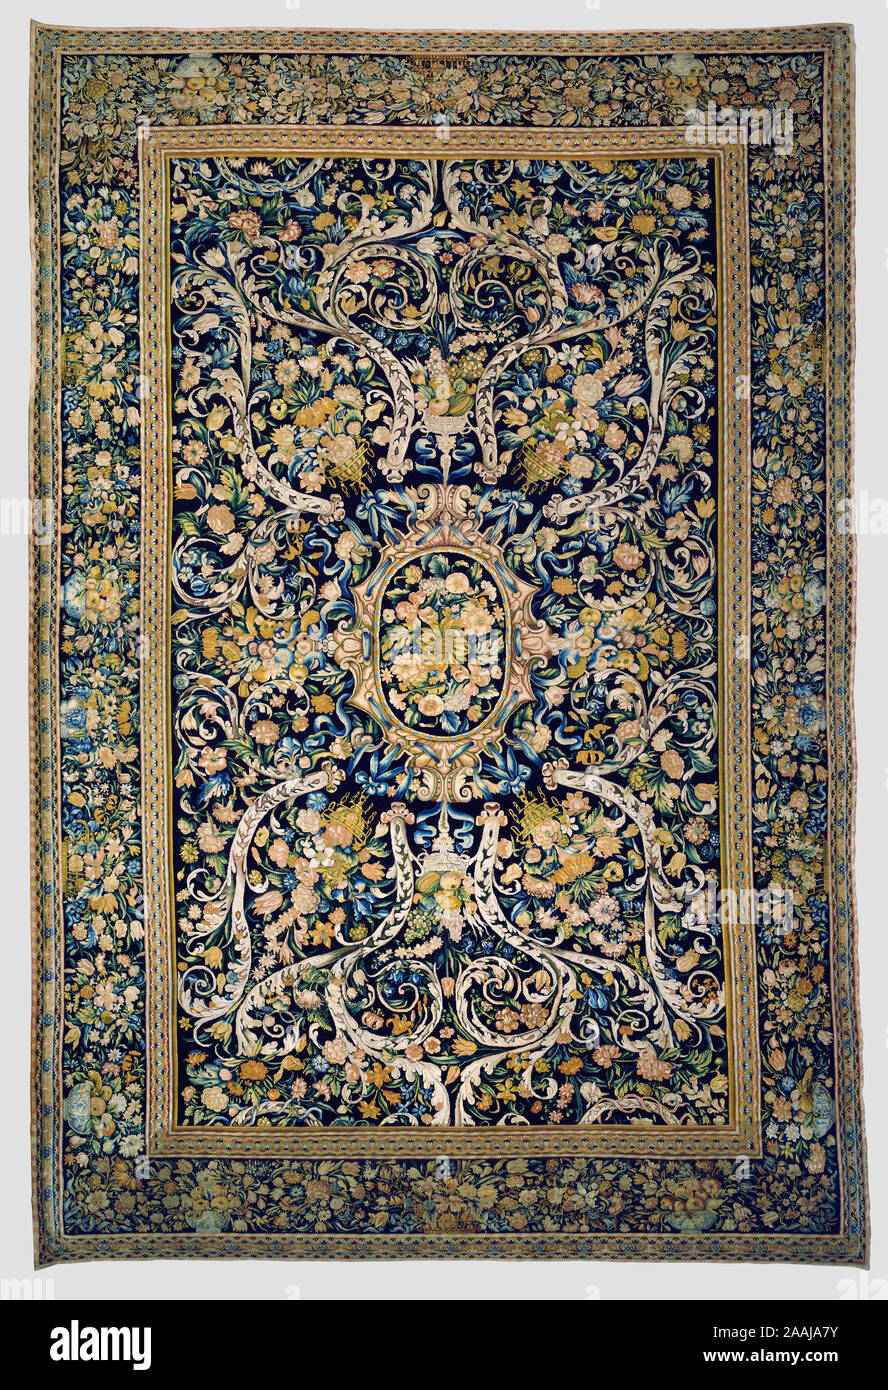 Carpet; Made in the Chaillot Workshops of Philippe Lourdet (French), and Simon Lourdet, Savonnerie Manufactory (French, active 1627 - present); Paris, France; about 1665 - 1666; Wool and linen; modern cotton lining; 642.1 x 428.8 cm (252 13/16 x 168 13/16 in.); 70.DC.63 Stock Photo